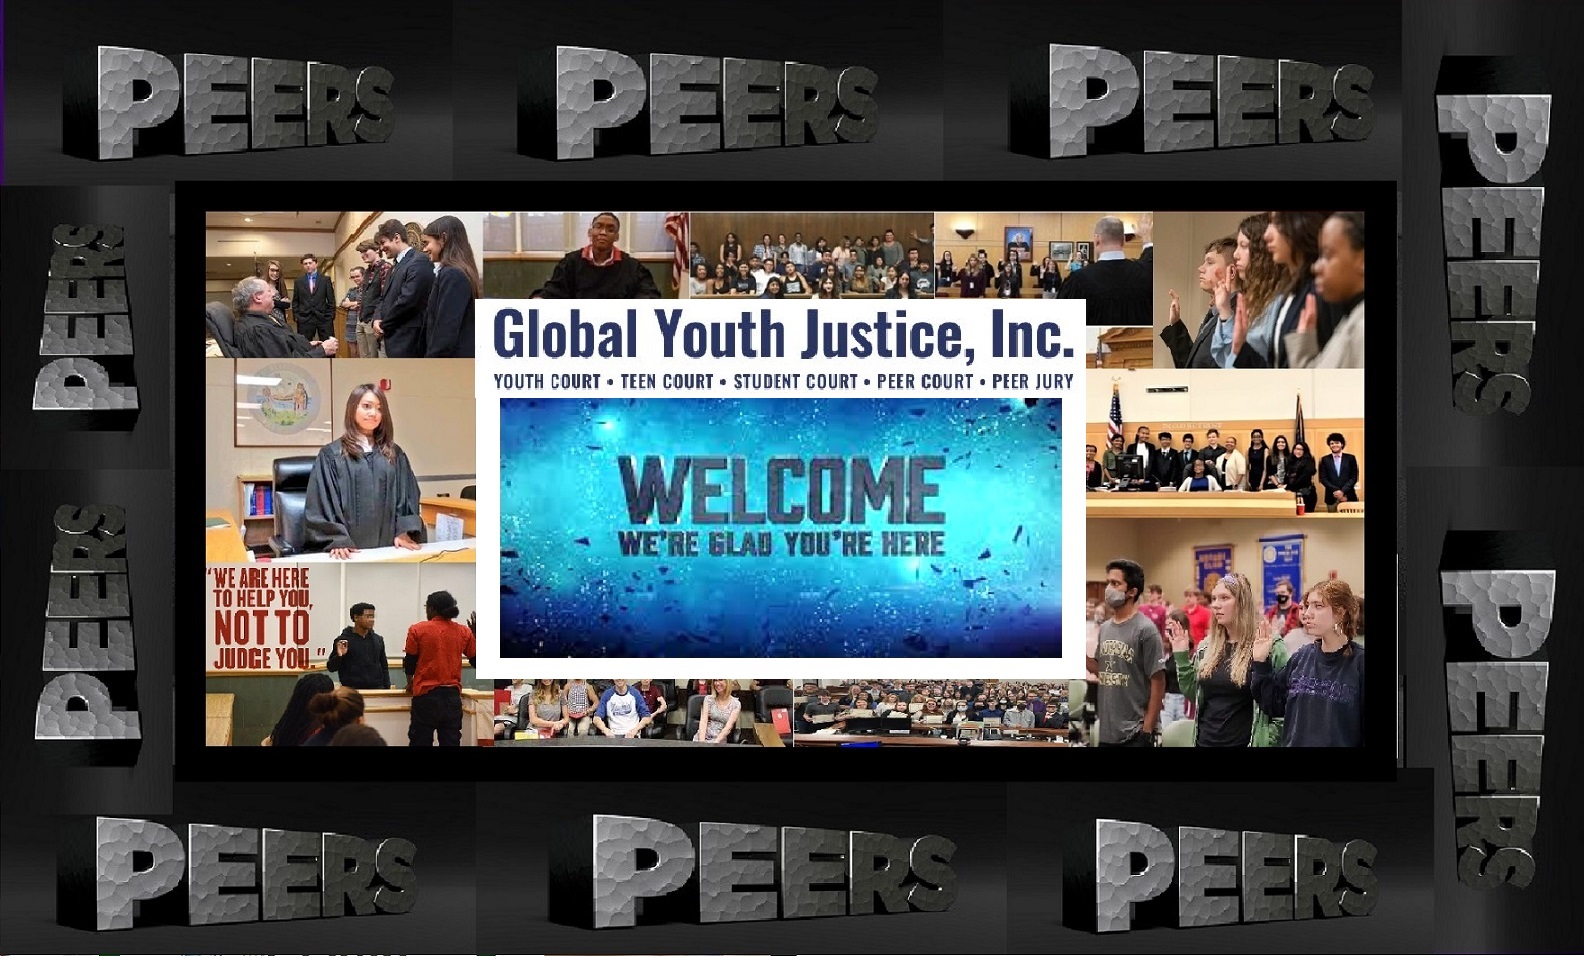 Global Youth Justice Website on Teen Court, Youth Court, Peer Court, Student Court and Peer Jury Diversion Programs.